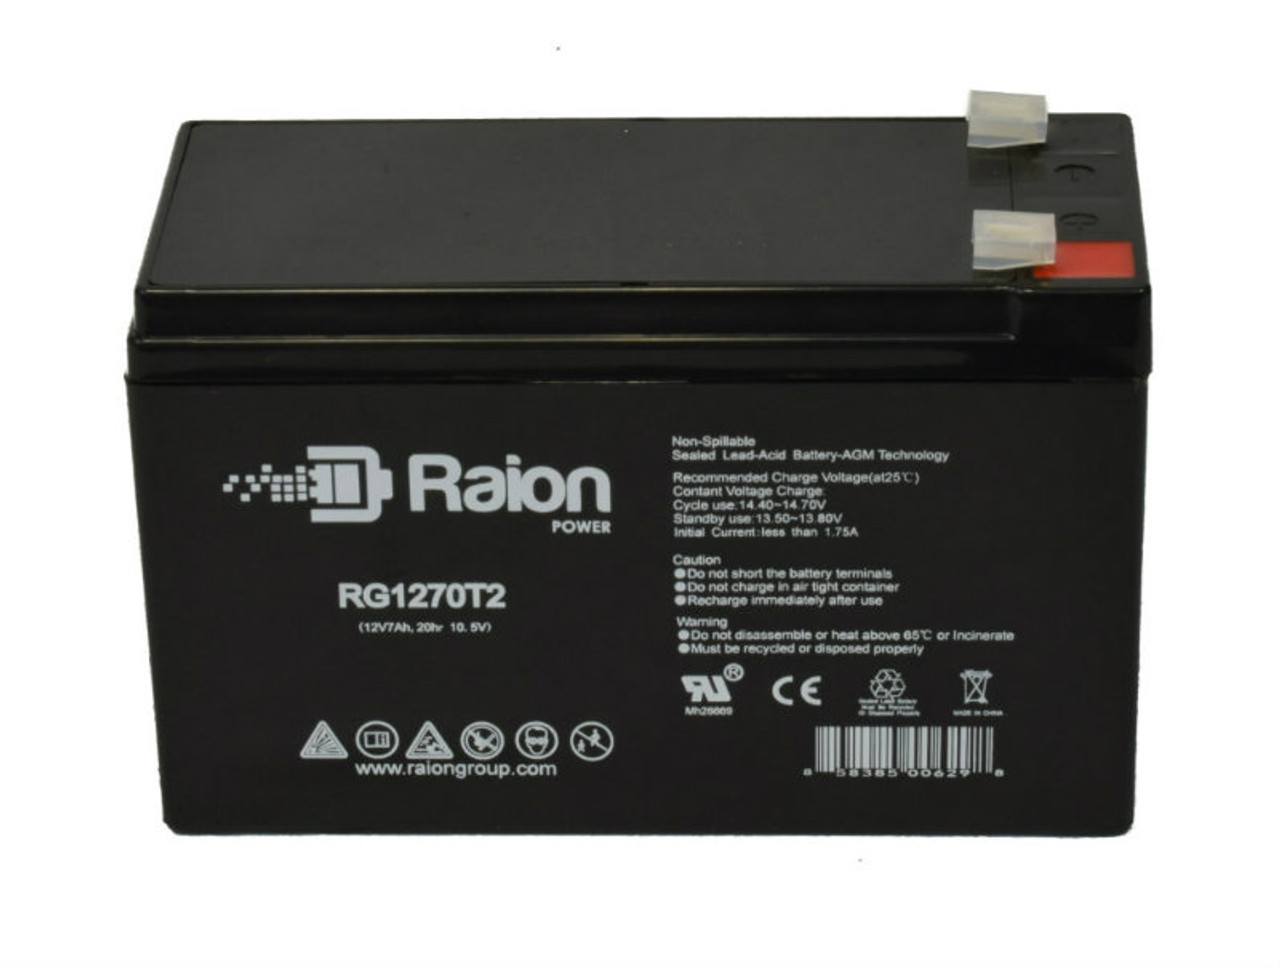 Raion Power RG1270T2 12V 7Ah AGM Battery for Razor EcoSmart SUP Electric Scooter